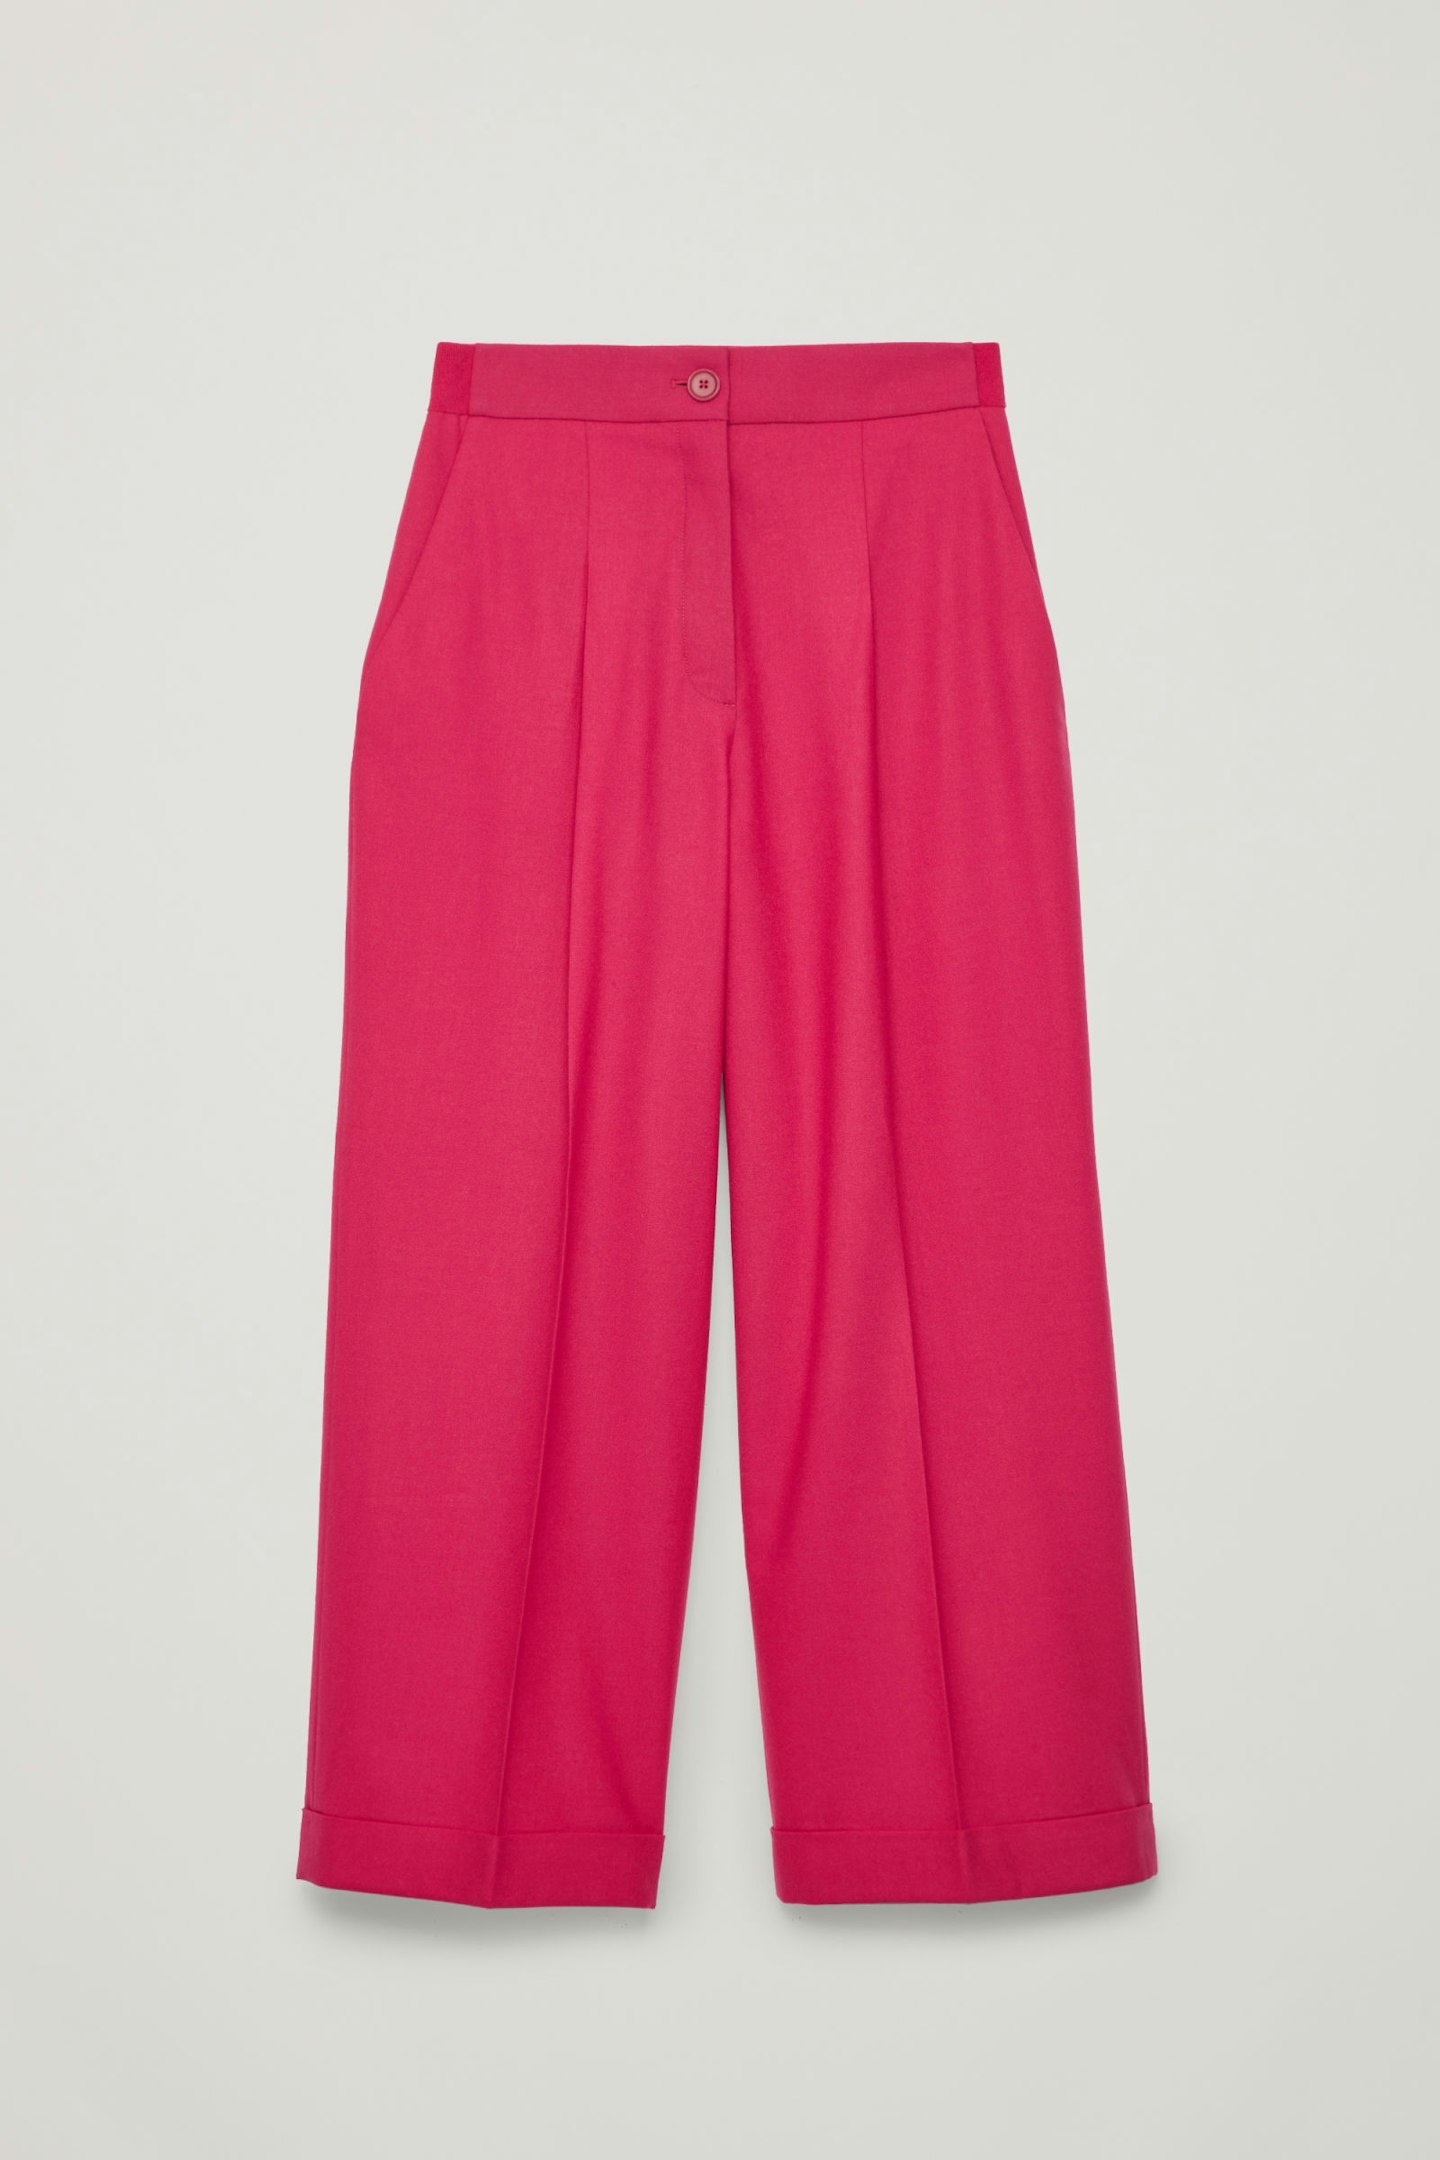 Cos, Turn-Up Wool Trousers, £89